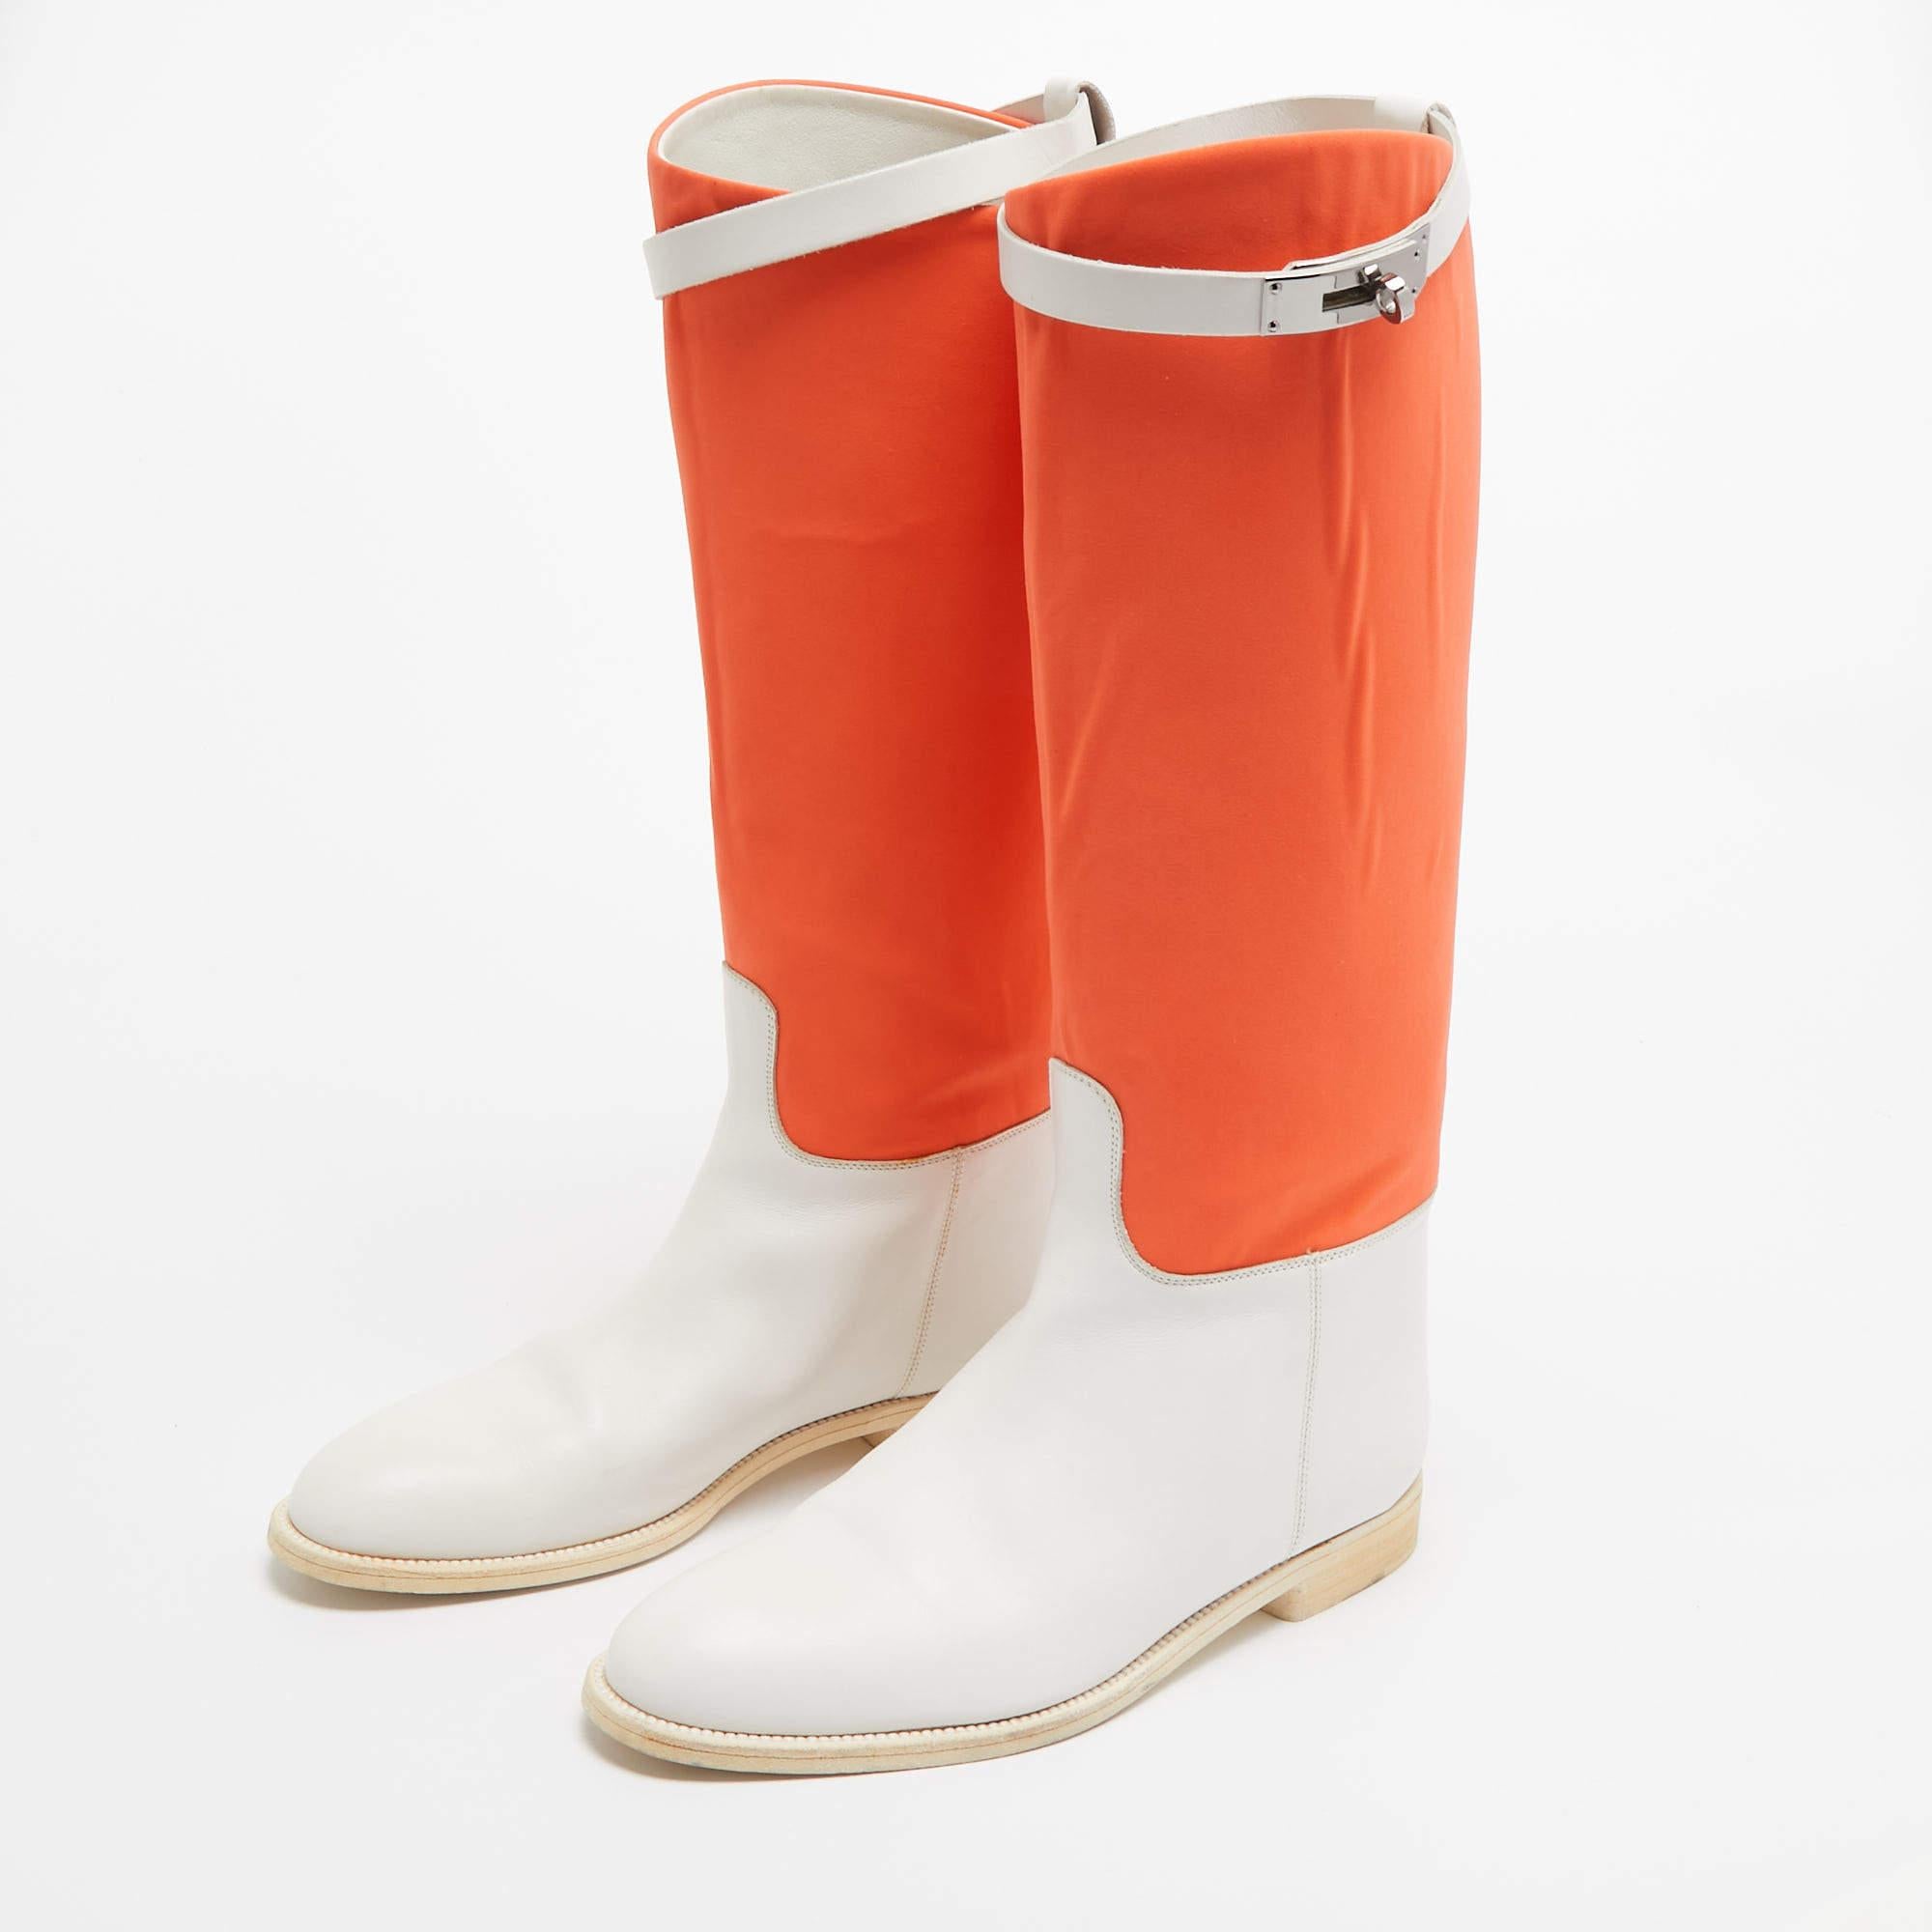 Hermes Neon Orange/White Neoprene and Leather Jumping Boots Size 39 For Sale 3